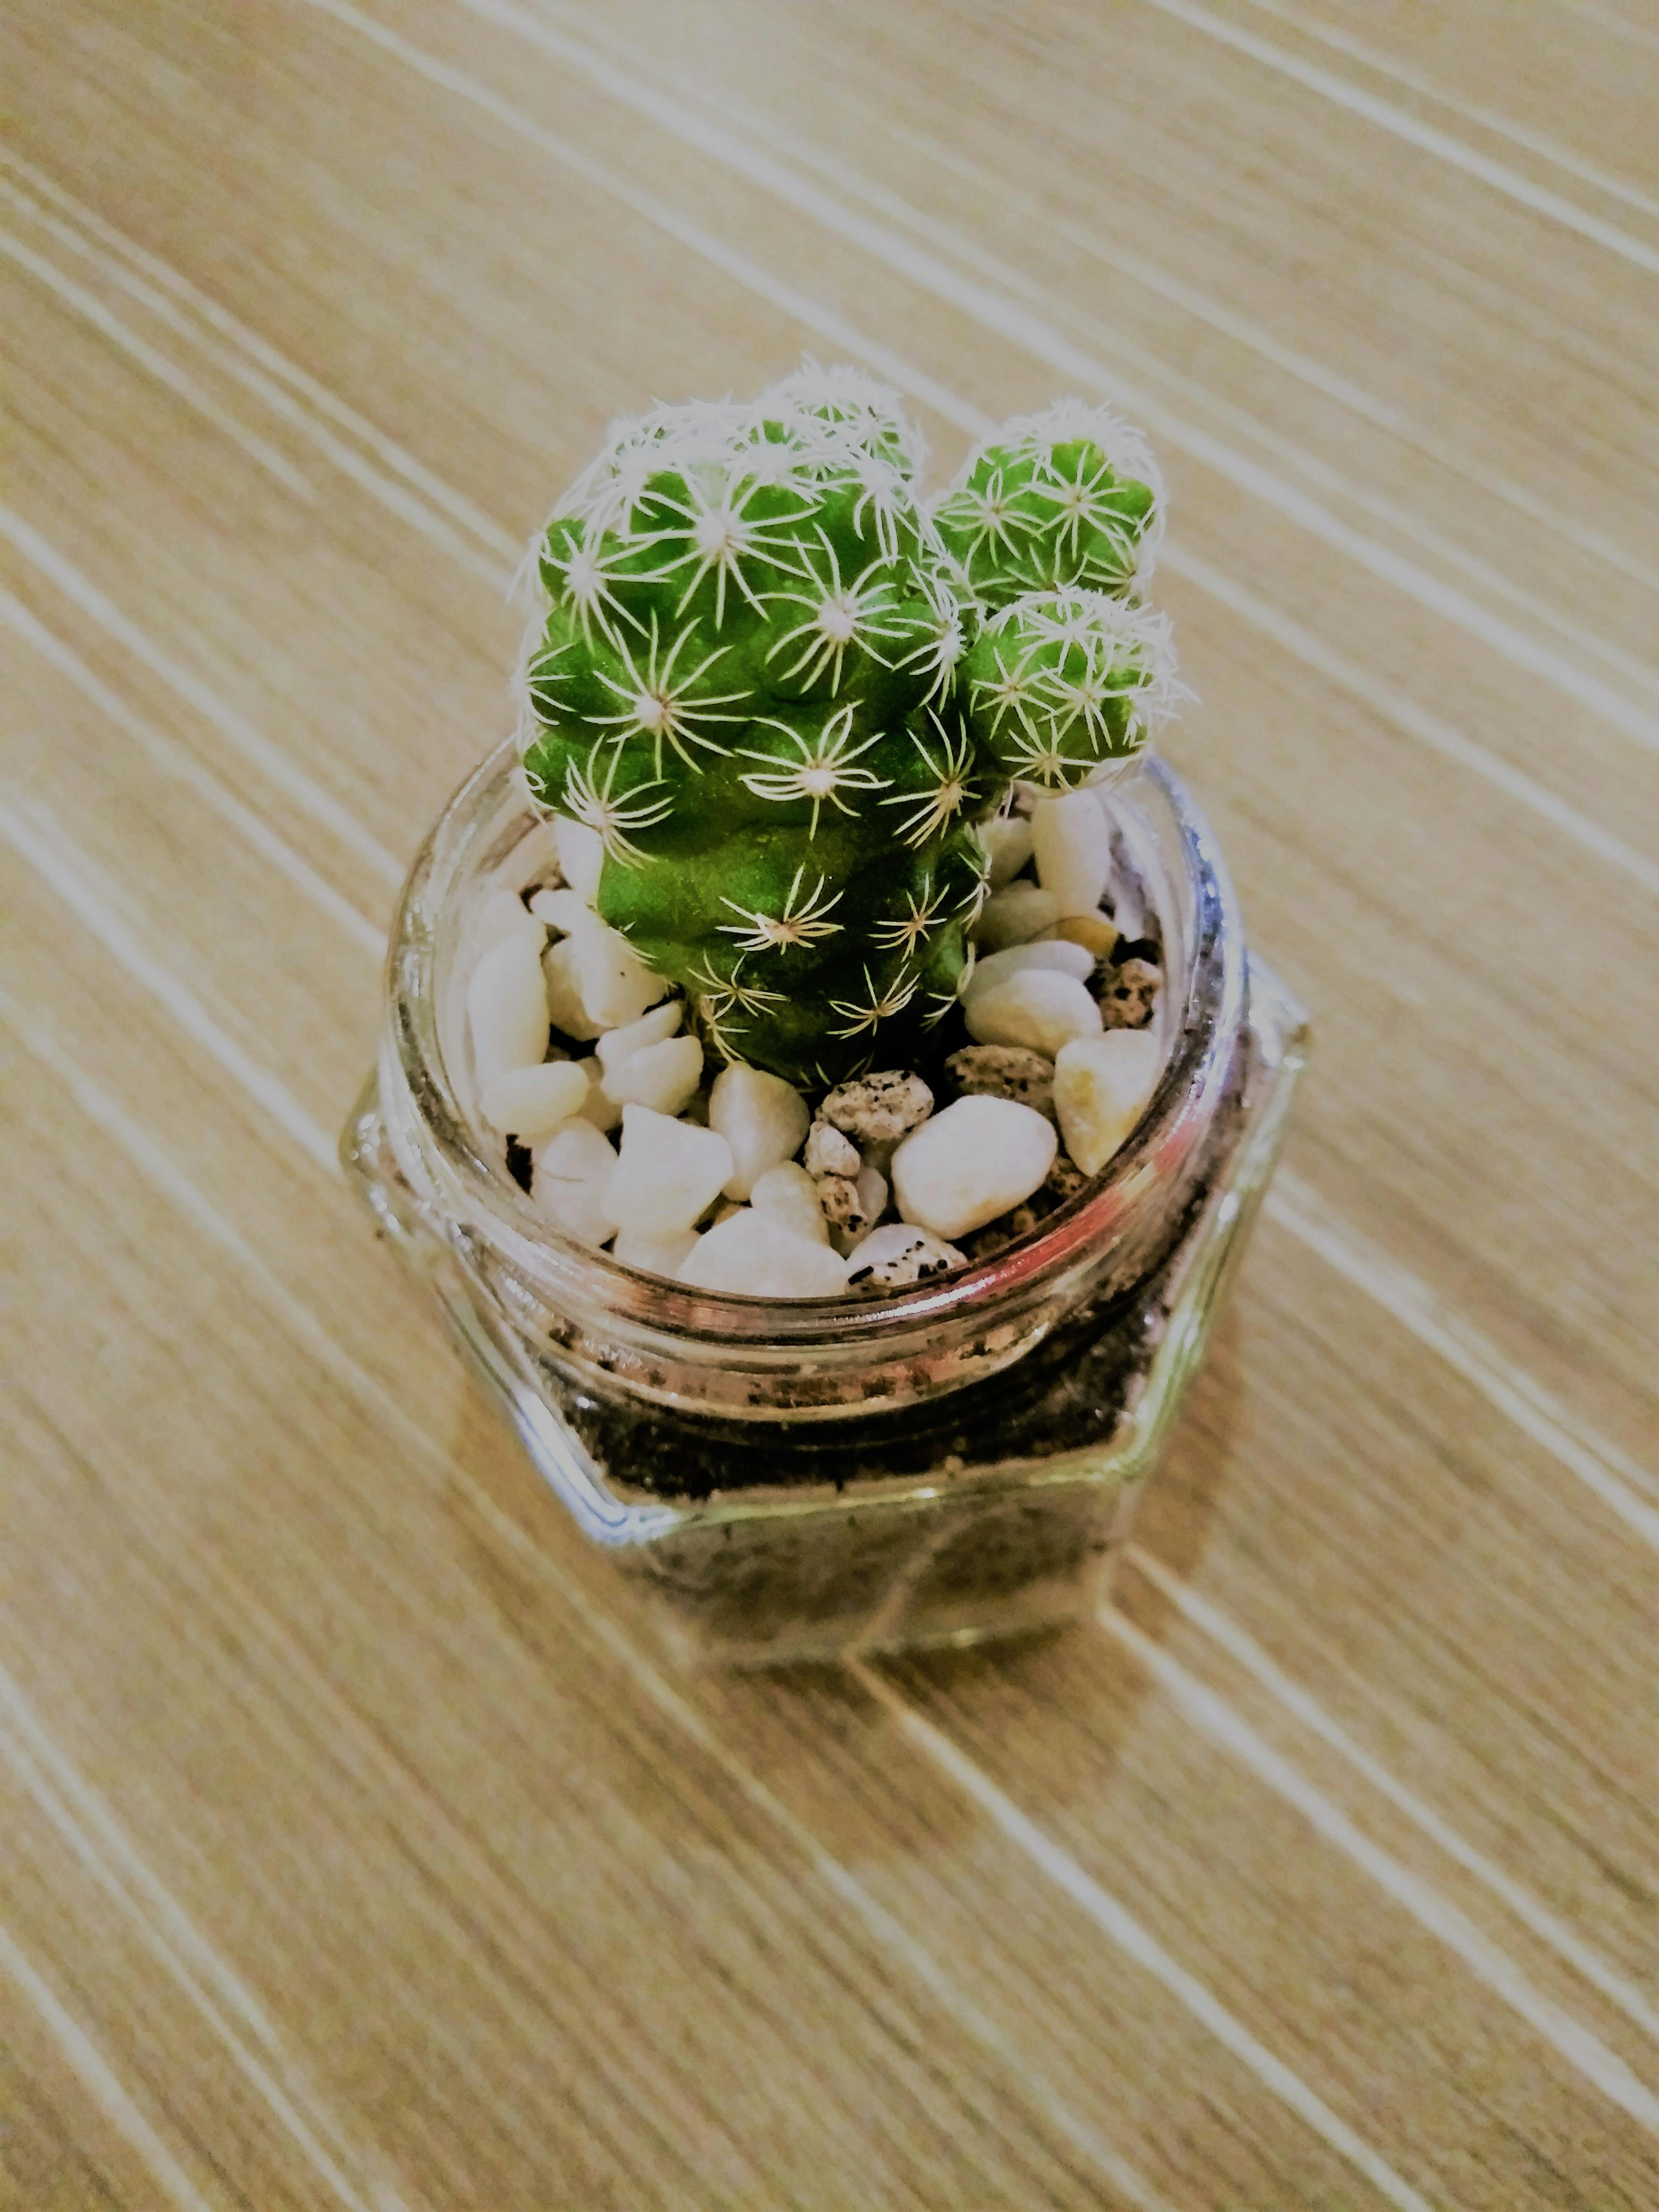 Free stock photo of cactus, officespace, succulent plant